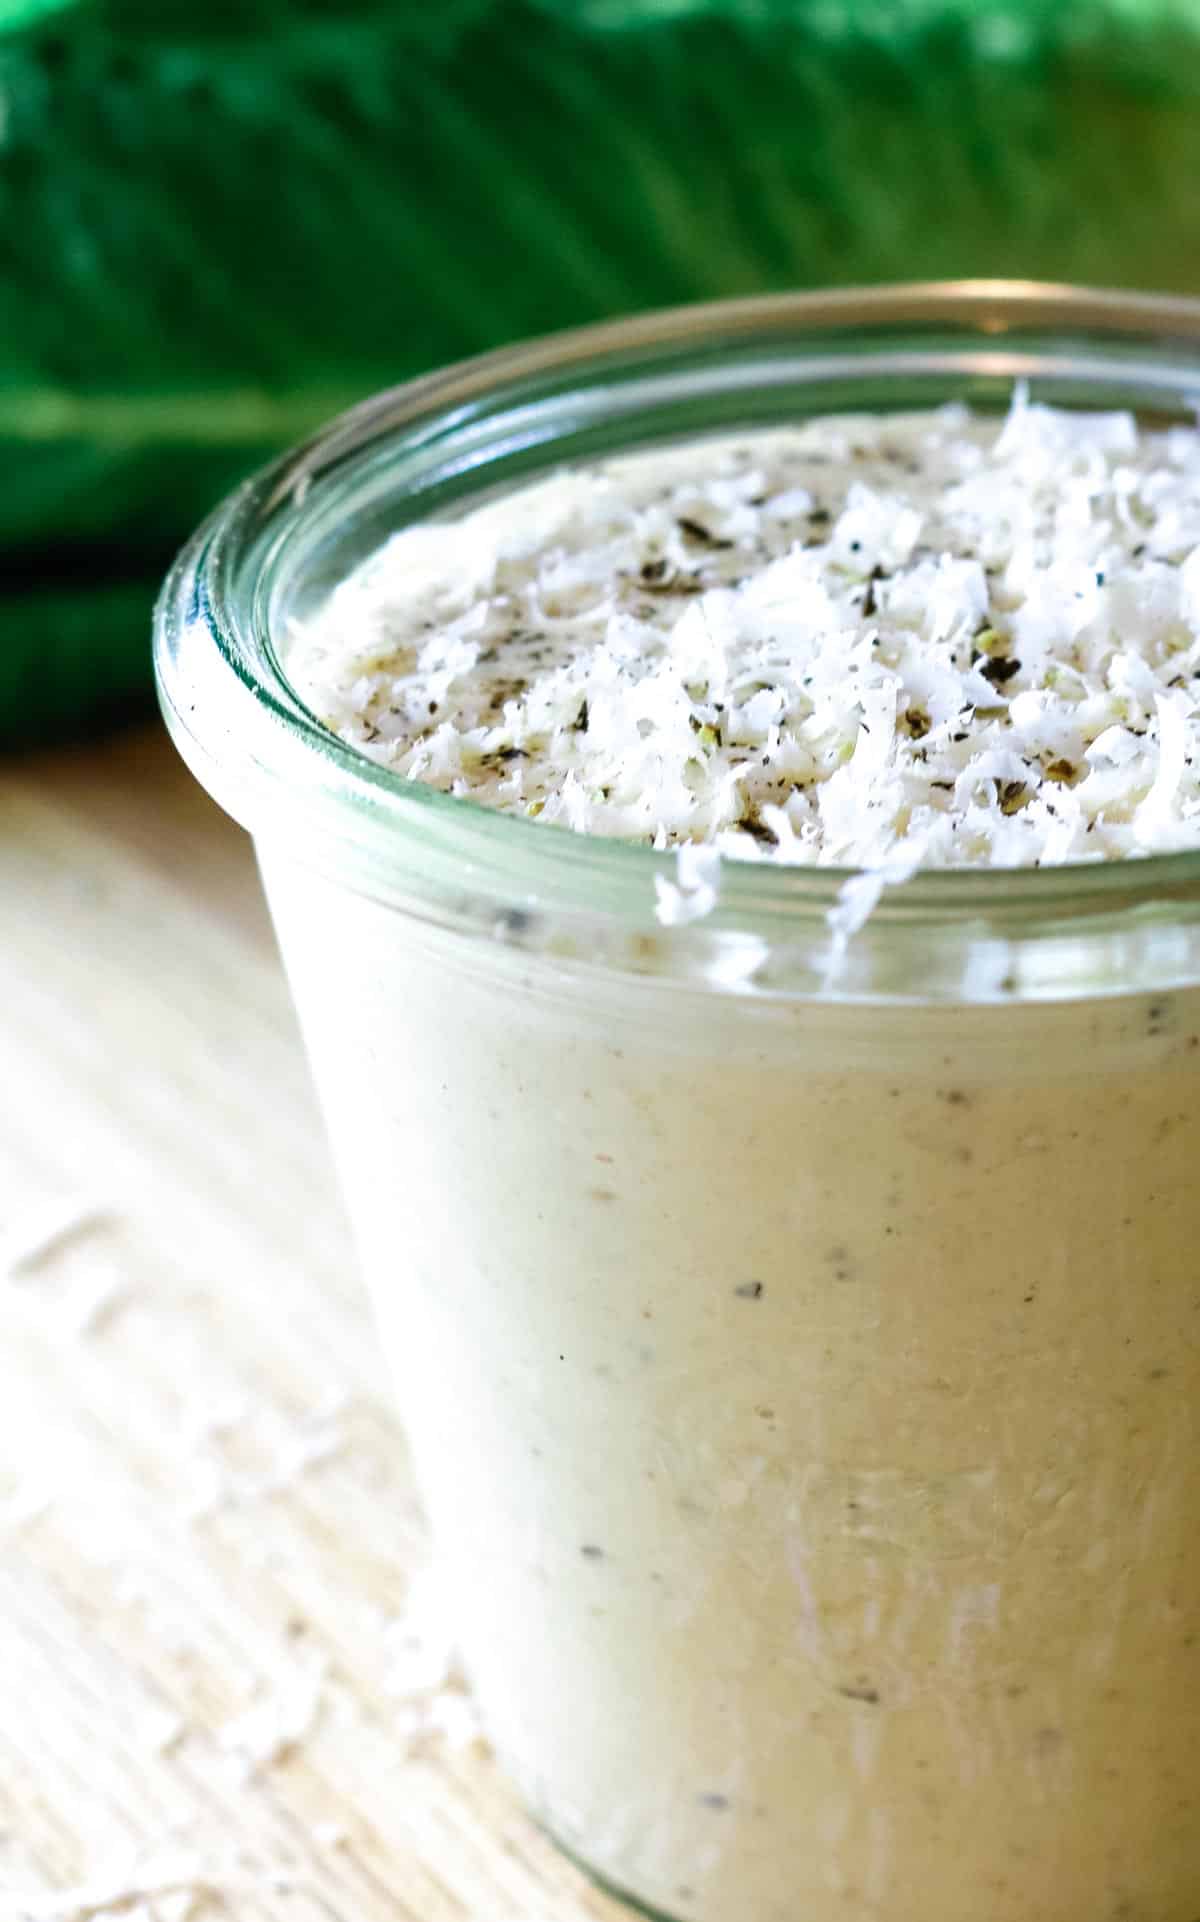 Caesar salad dressing with cracked black pepper and parmesan